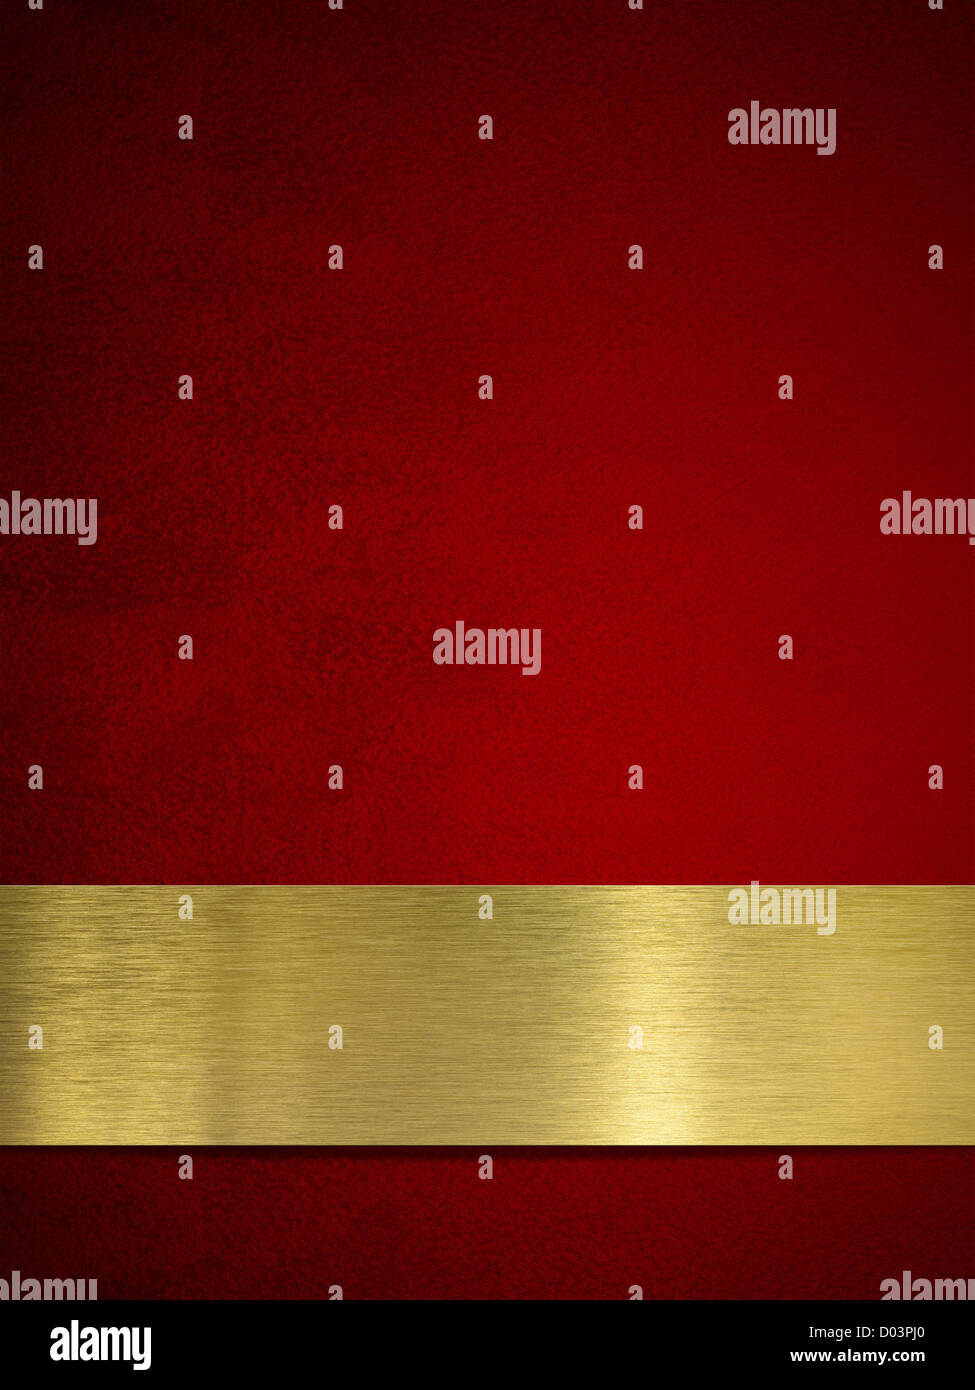 gold plate or plaque on red background Stock Photo